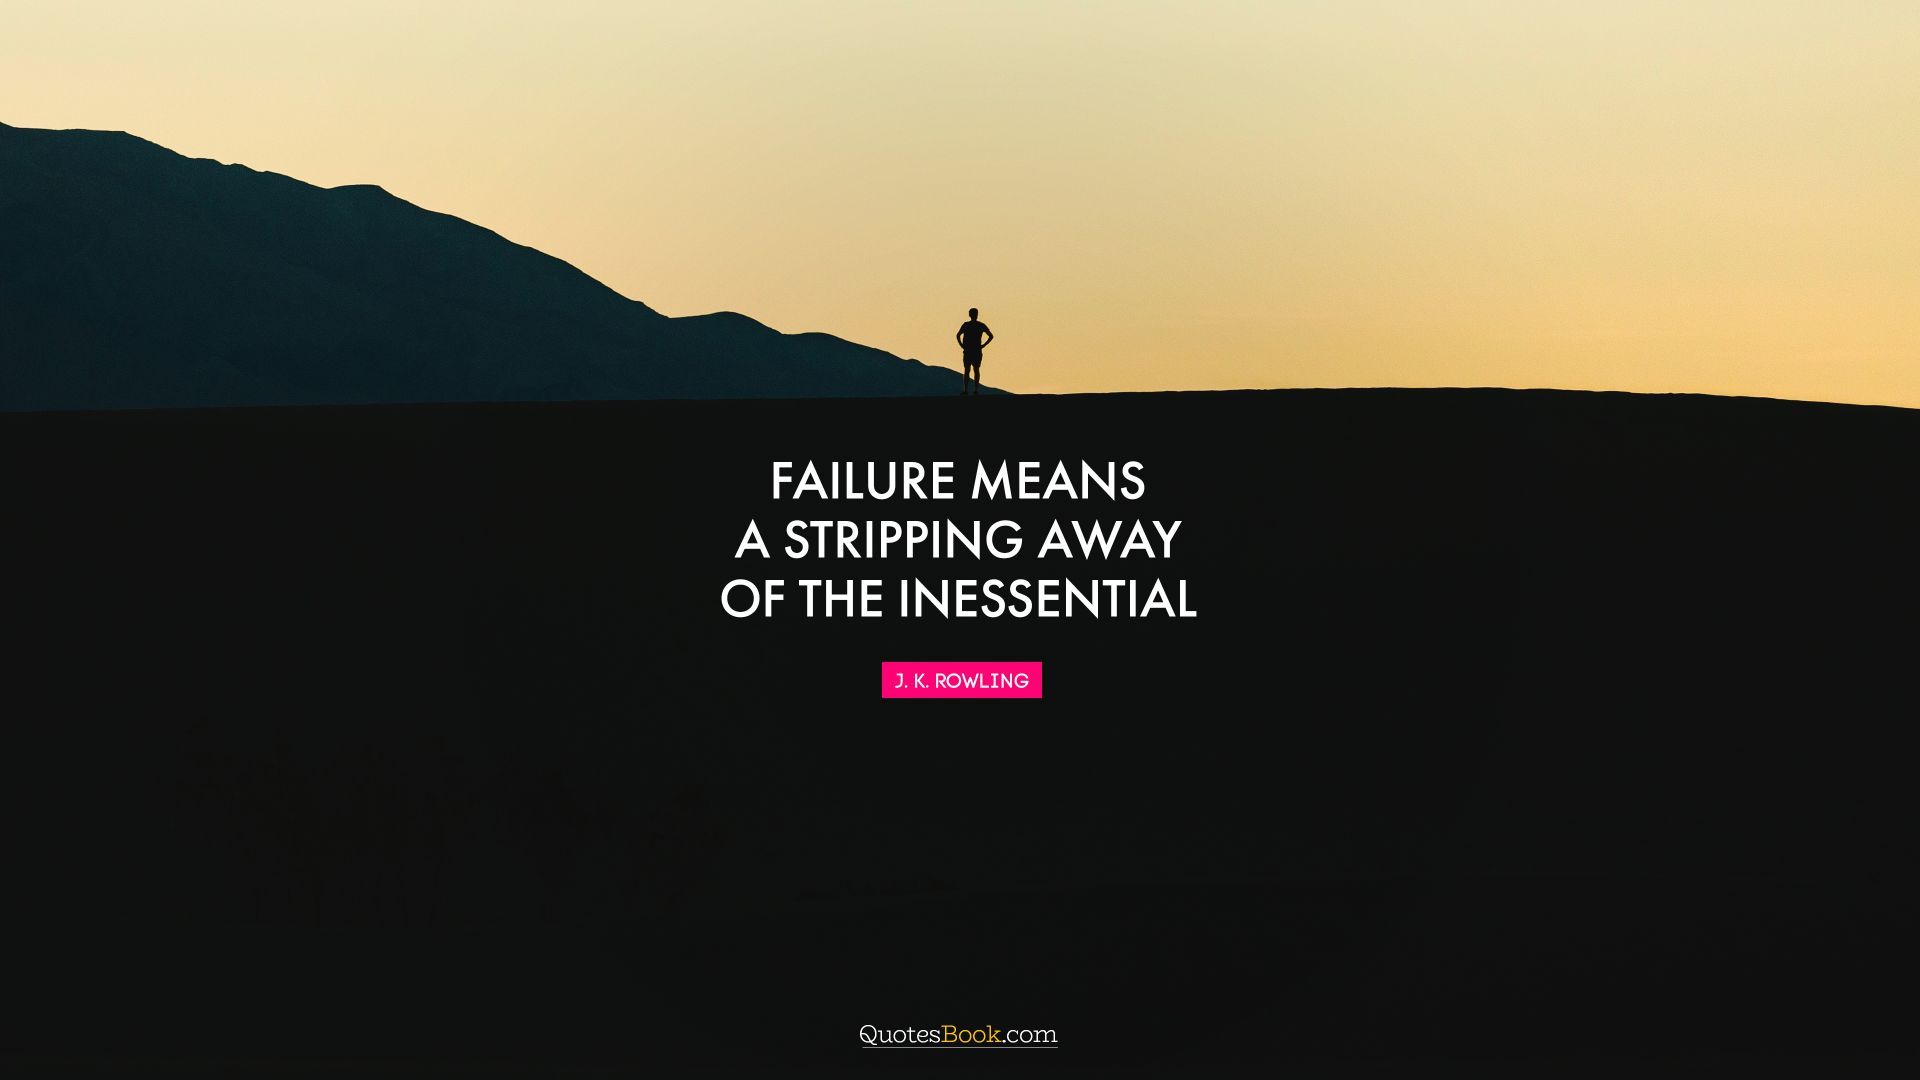 Failure means a stripping away of the inessential. - Quote by J. K. Rowling